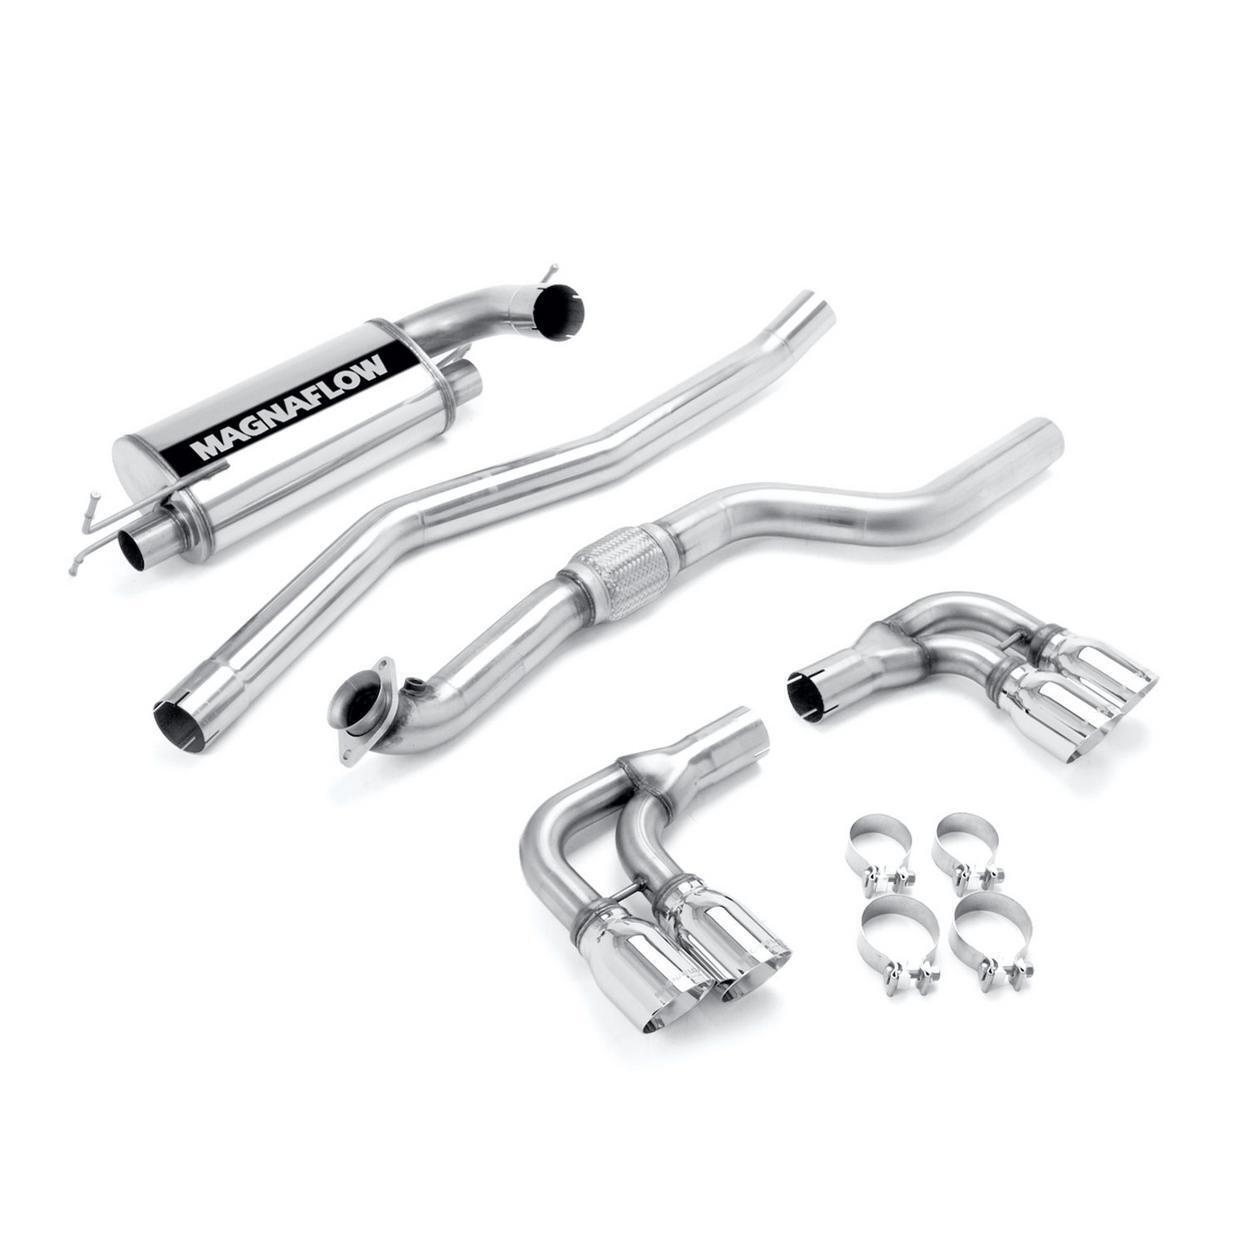 Exhaust System Kit for 2007-2009 Saturn Sky Red Line Turbo 2.0L L4 GAS DOHC